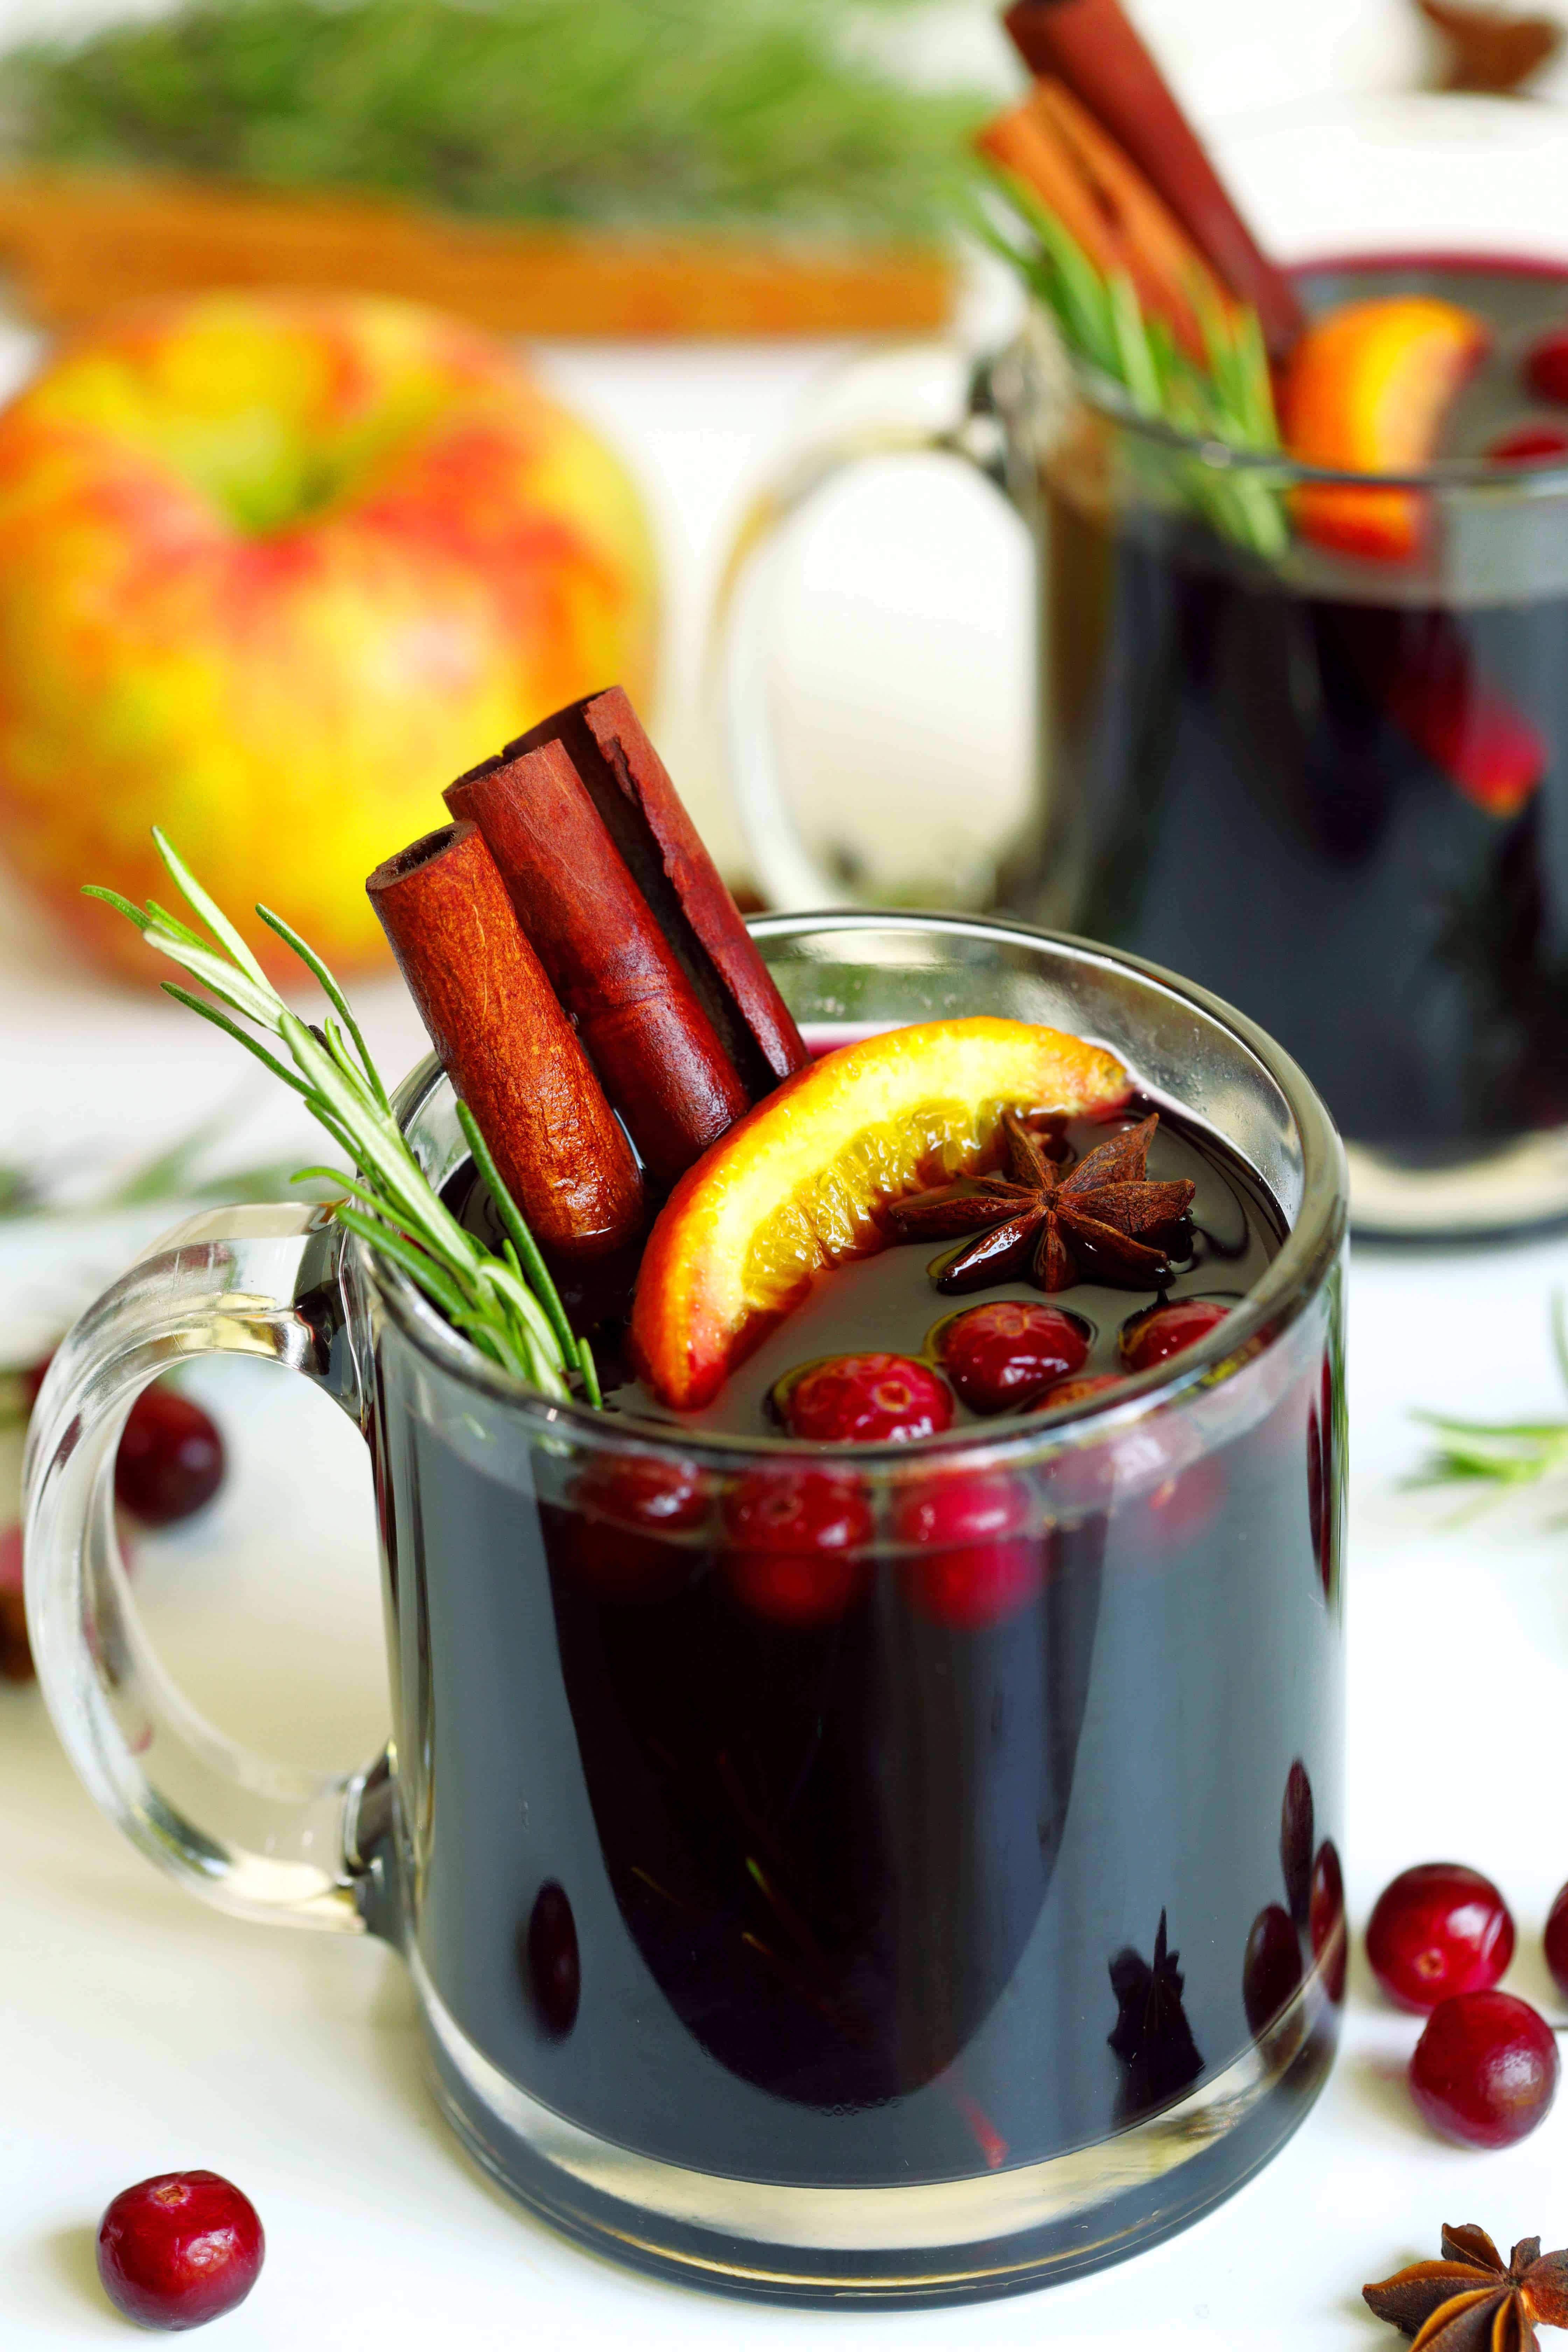 Mulled wine in a clear mug, garnished with rosemary sprig, cinnamon sticks, apple slice, star anise, and cranberries. Mug is sitting atop a white table cloth surrounded by cranberries on the table.